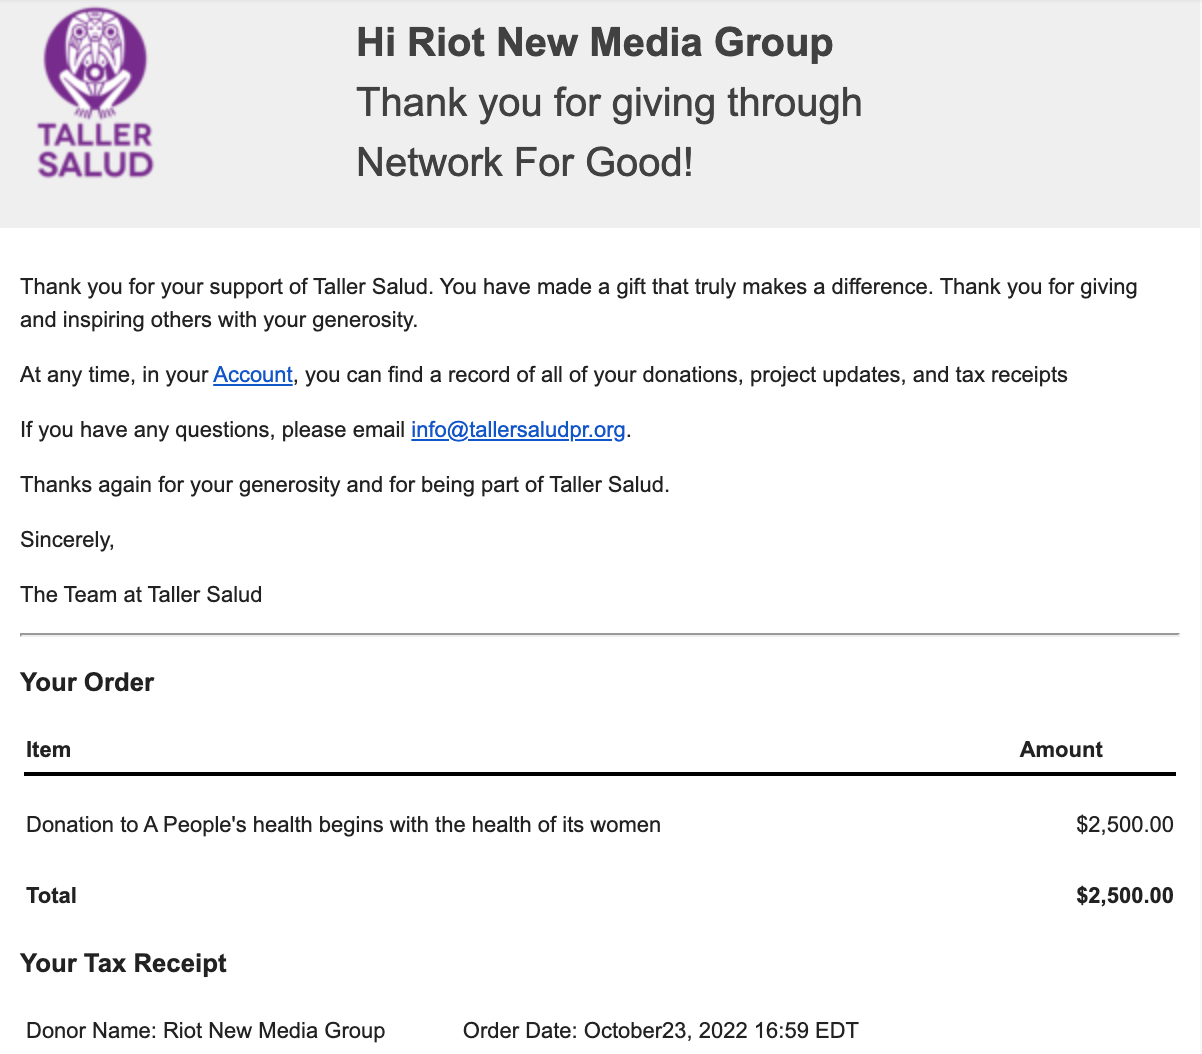 received a $2,500 donation to Taller Salud on behalf of Riot New Media Group